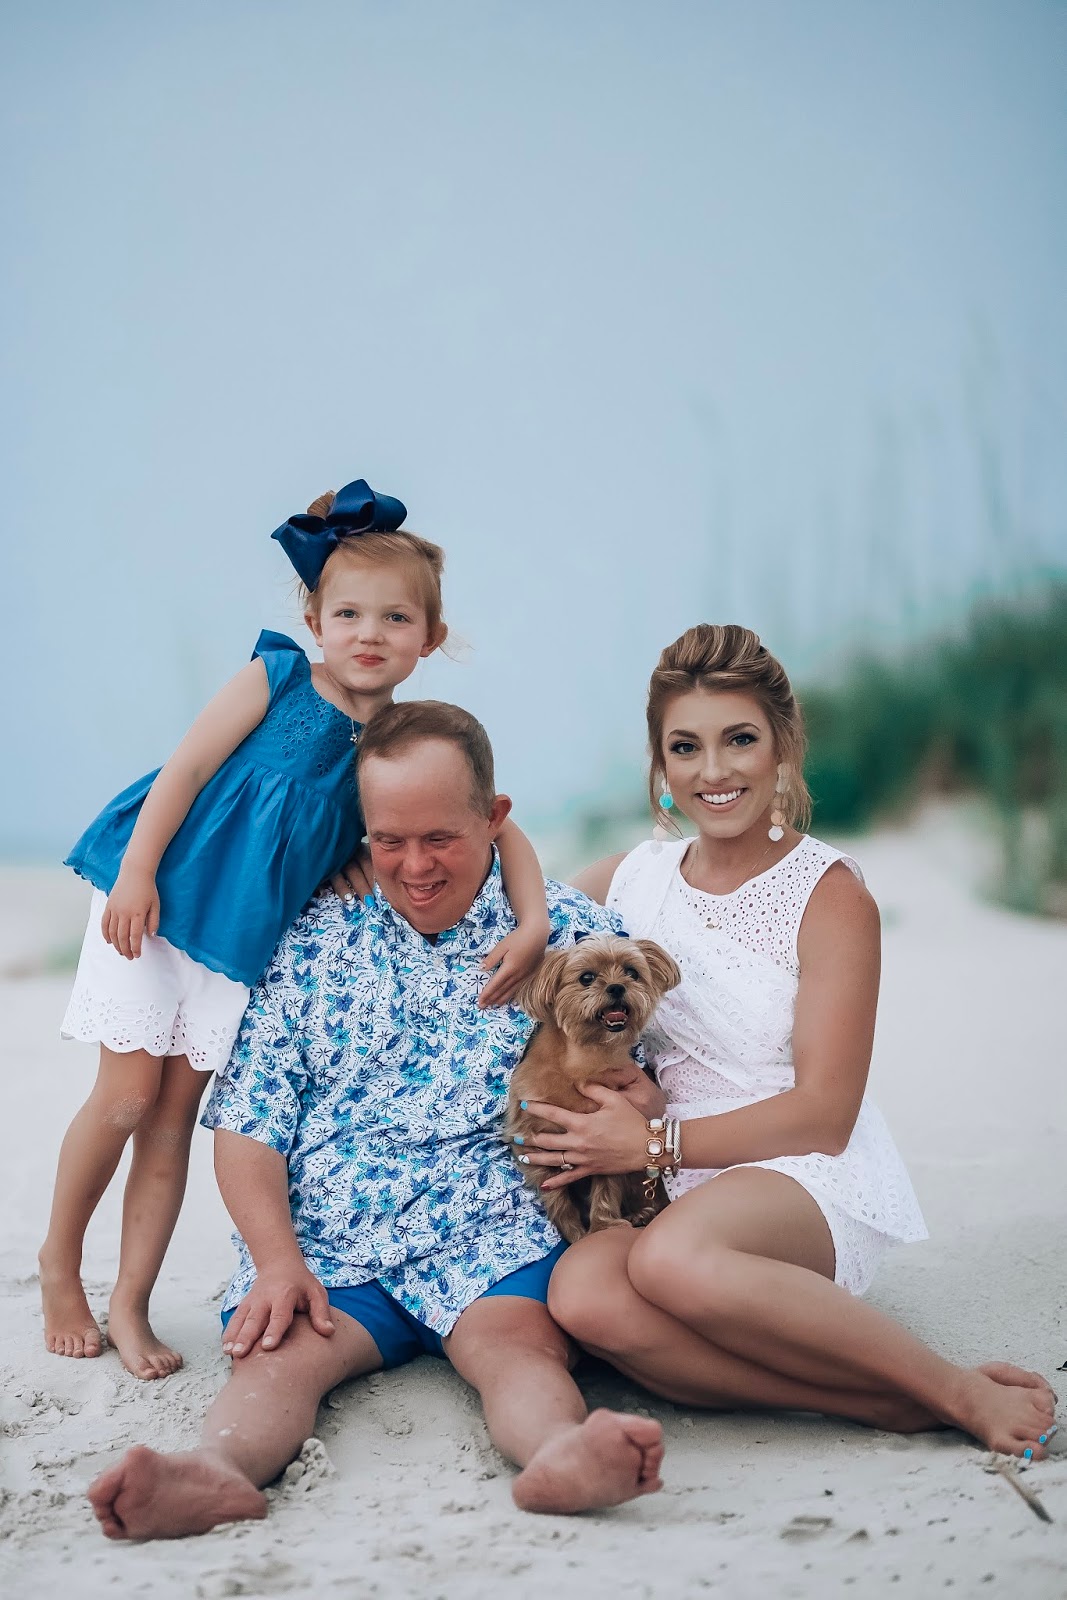 A New Post With Uncle Doug - A story about my Uncle who has Down Syndrome in New Smyrna Beach, FL. - Something Delightful Blog